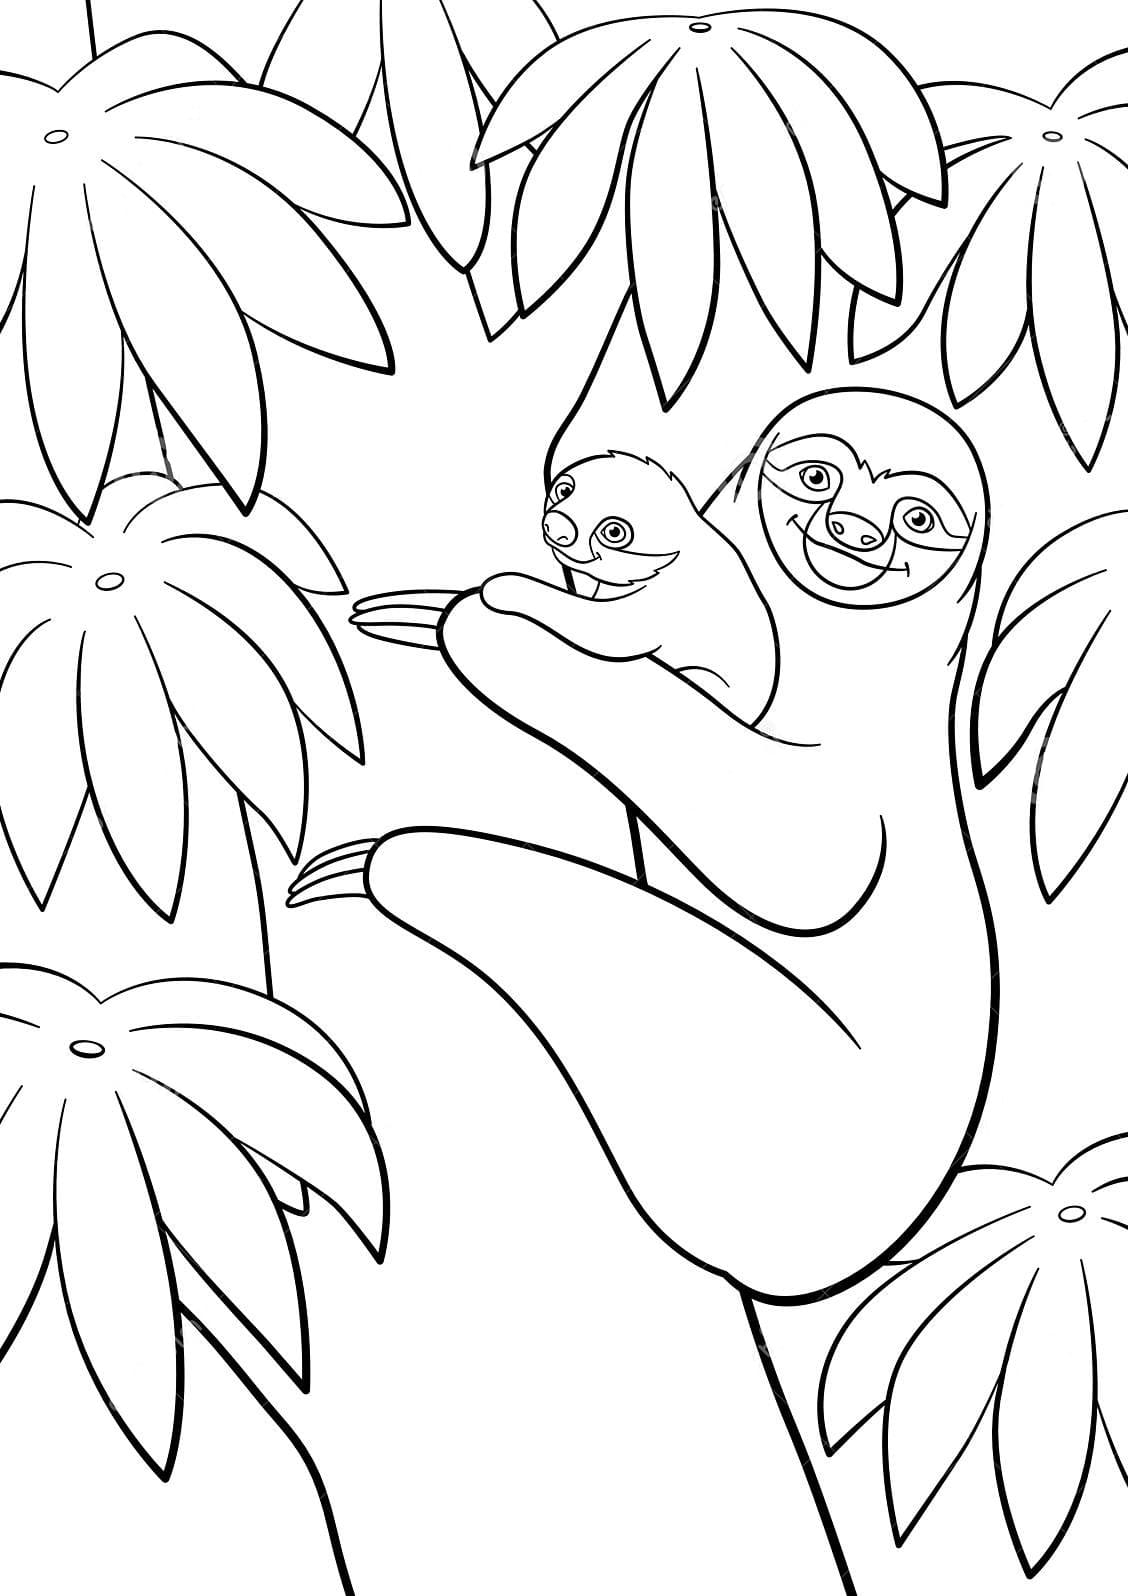 Sloth Coloring Pages | 100 Pictures Free Printable